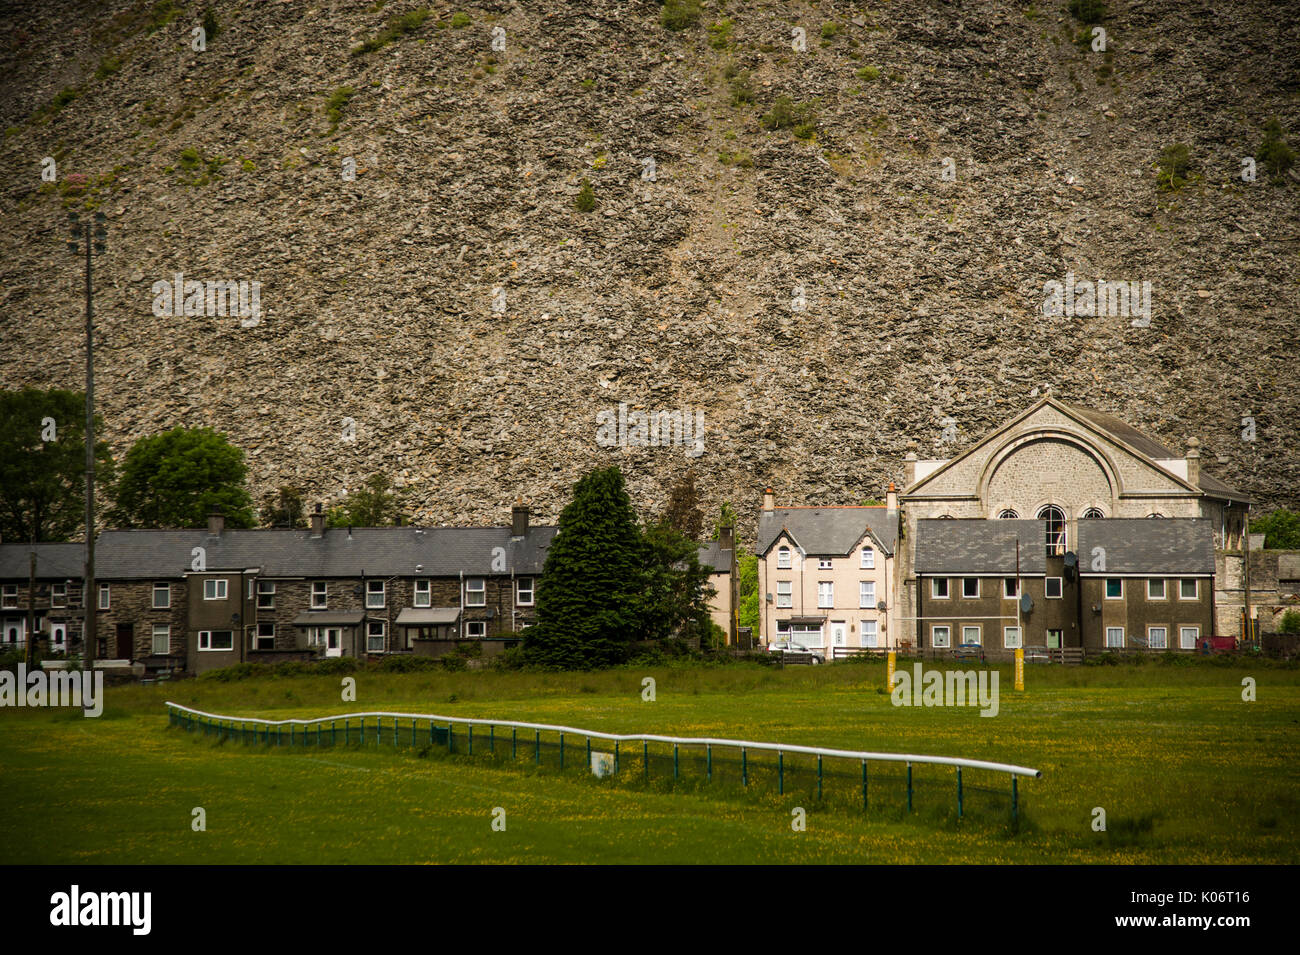 Mountains of slate waste towering over the houses, chapel  and rugby pitch in Blaenau Ffestiniog, Gwynedd, North Wales UK Stock Photo